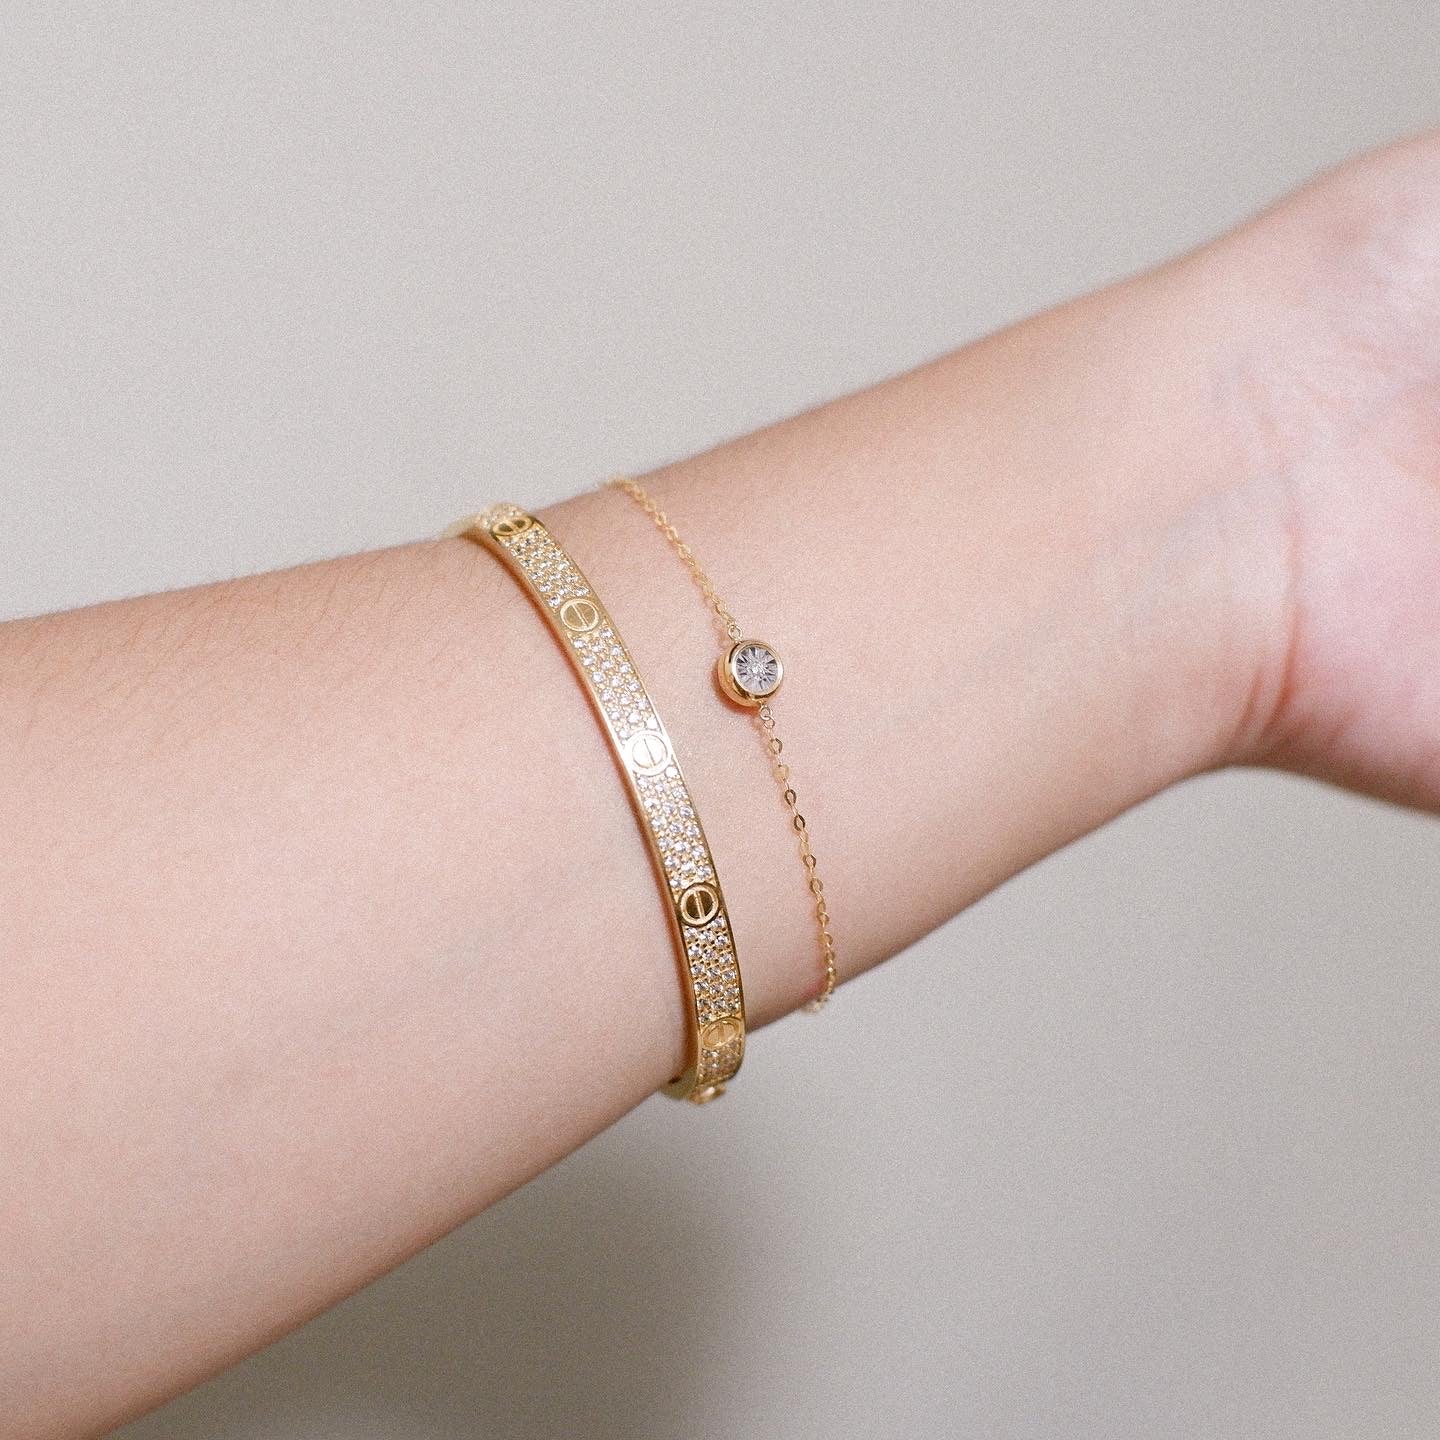 The Classic Diamond Bracelet in Solid Gold